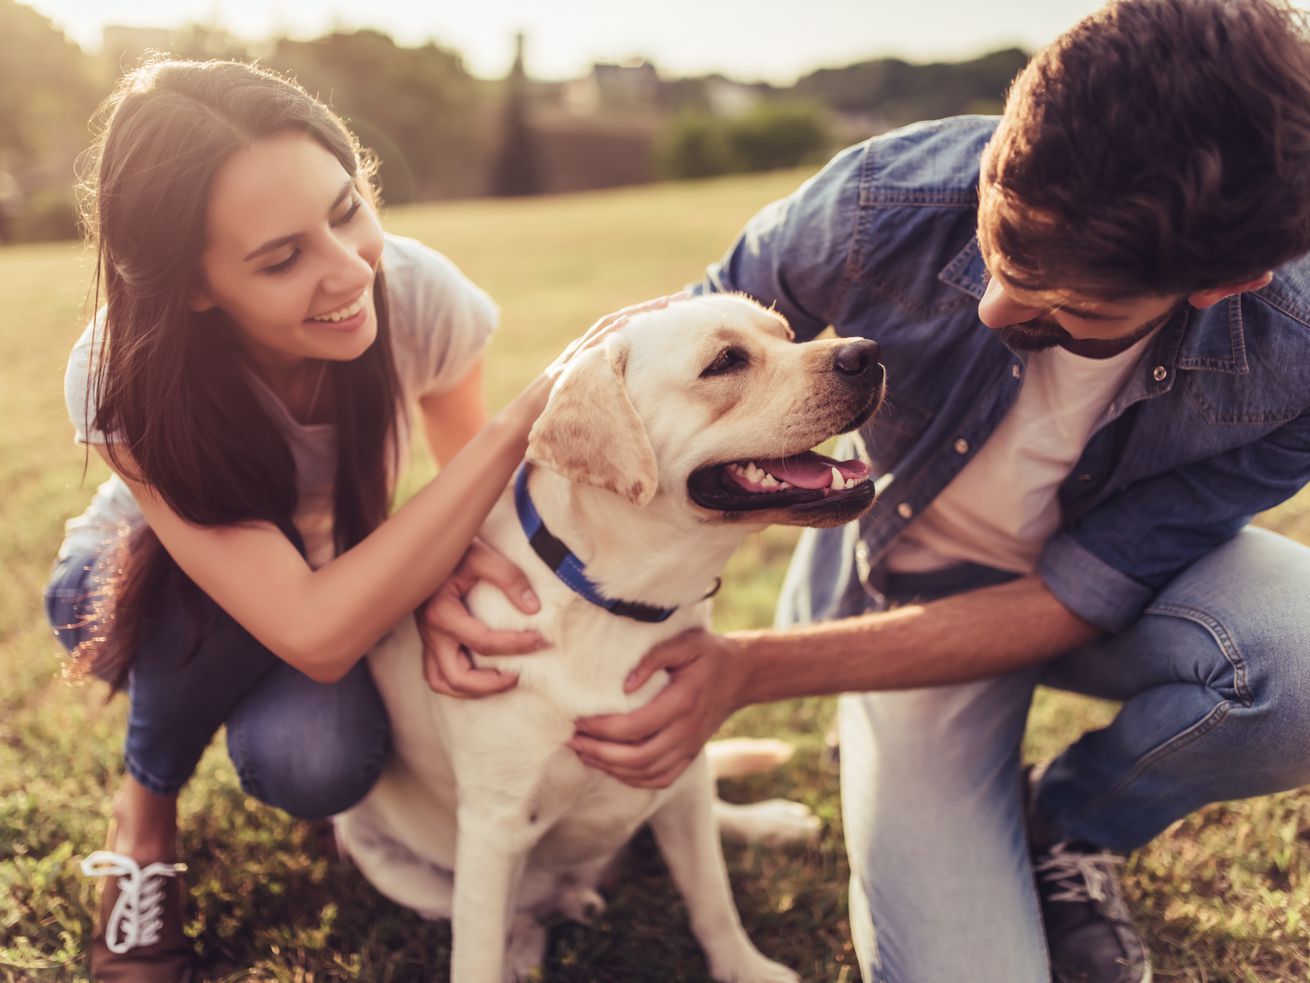 If your new dog or cat gets sick or injured, an unexpected medical bill can derail your budget. For a growing number of Americans, pet insurance provides peace of mind.